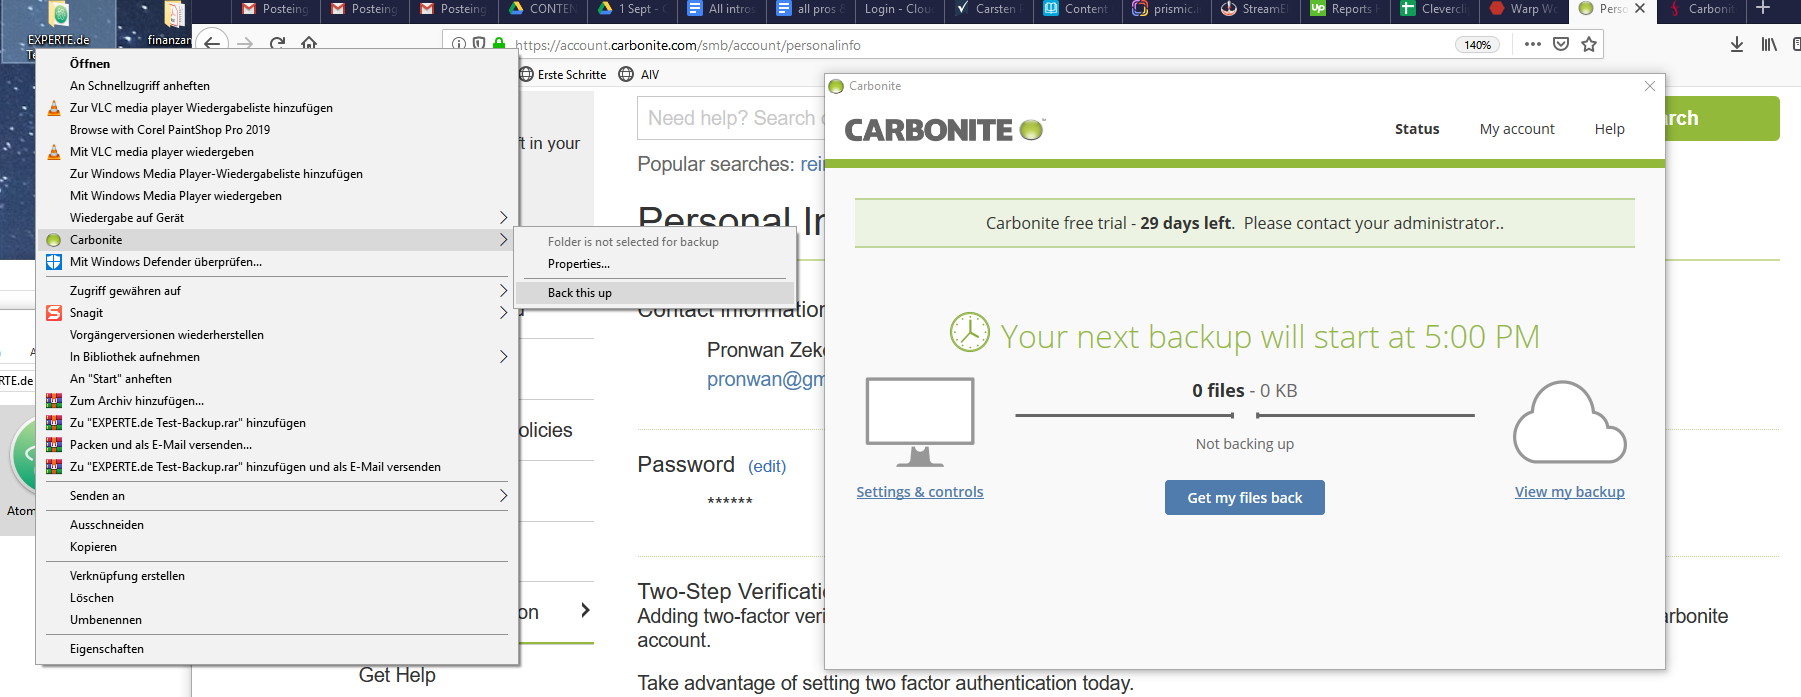 carbonite backups are slow